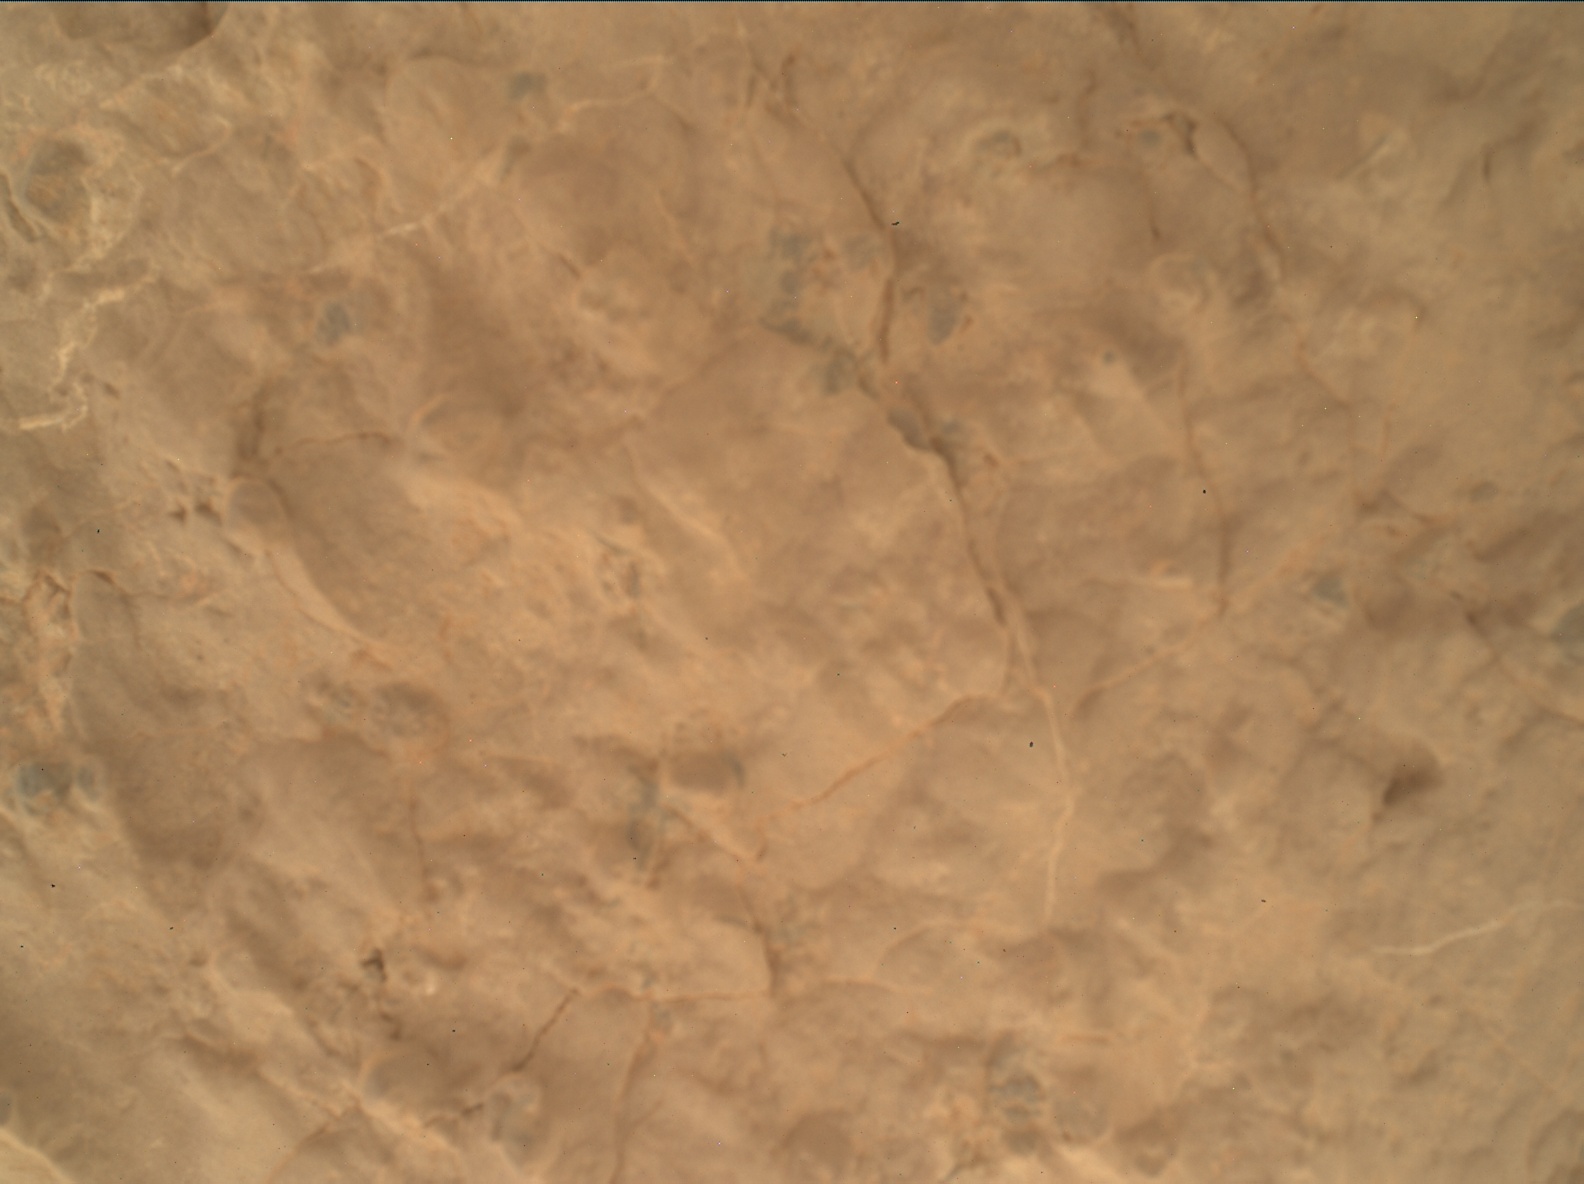 Nasa's Mars rover Curiosity acquired this image using its Mars Hand Lens Imager (MAHLI) on Sol 2611